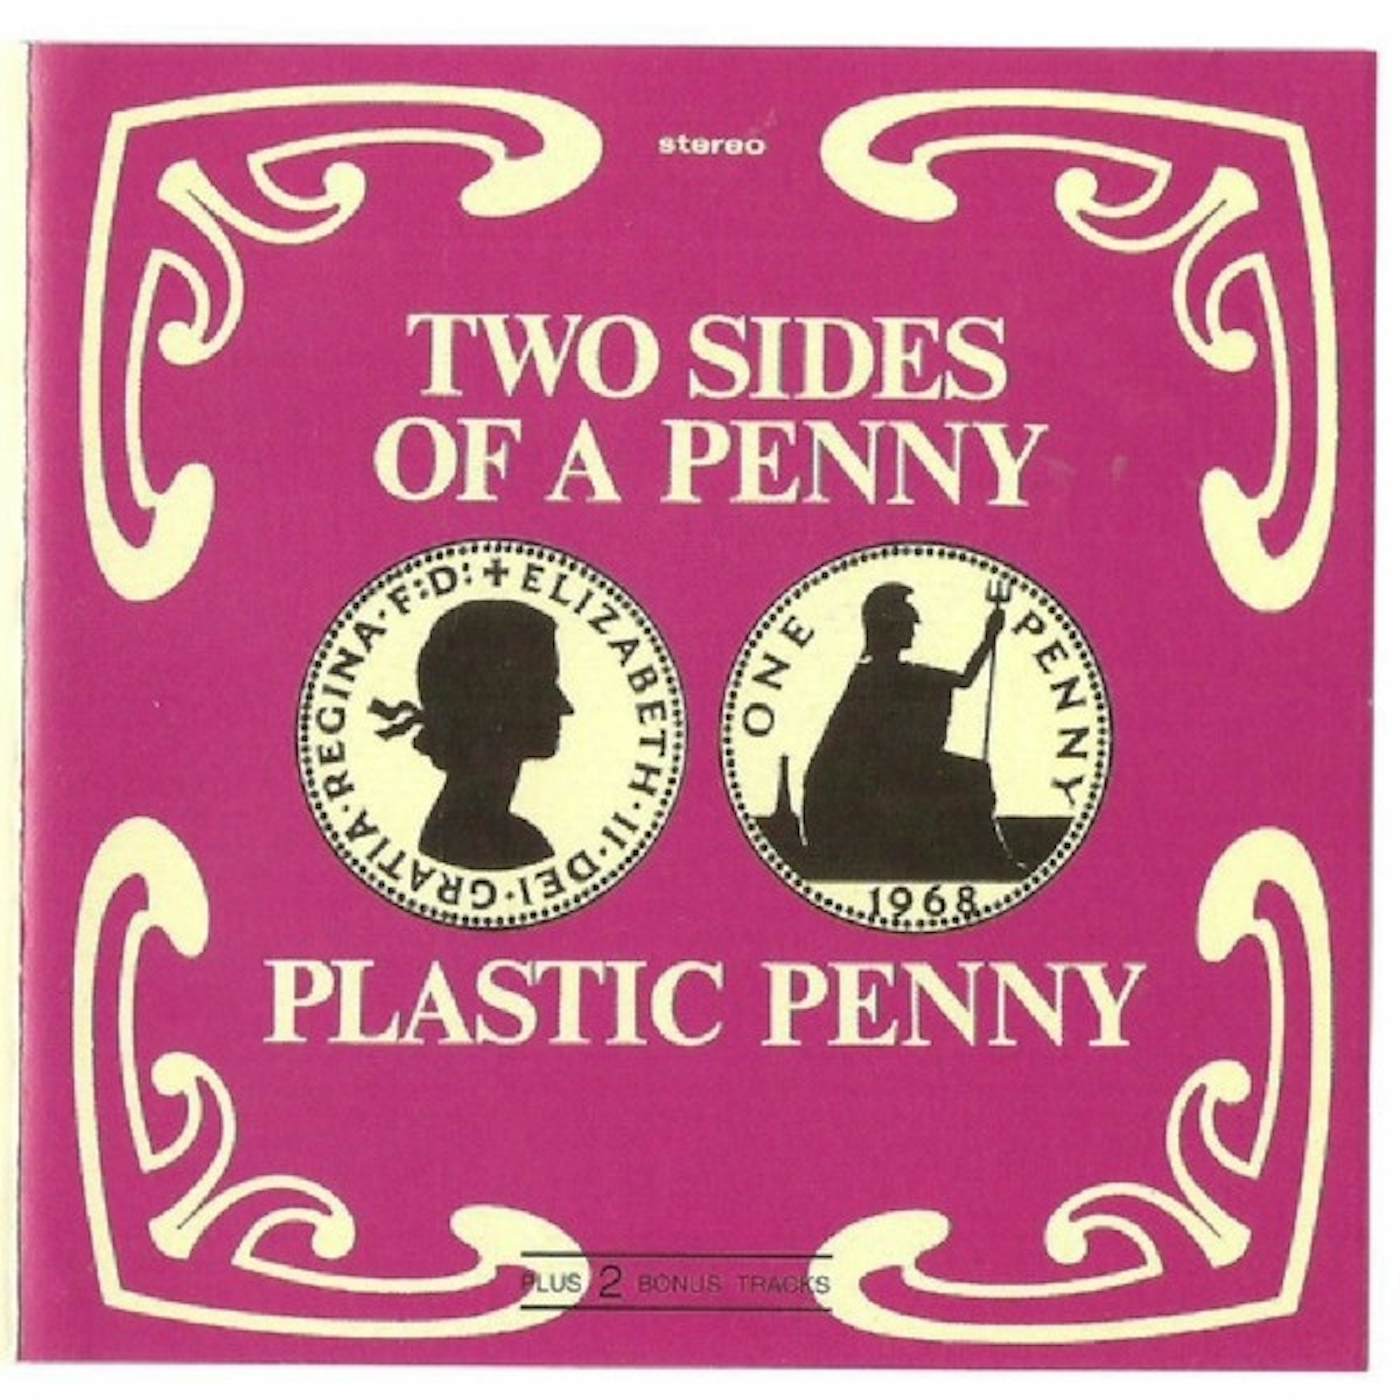 Plastic Penny Two Sides of a Penny Vinyl Record